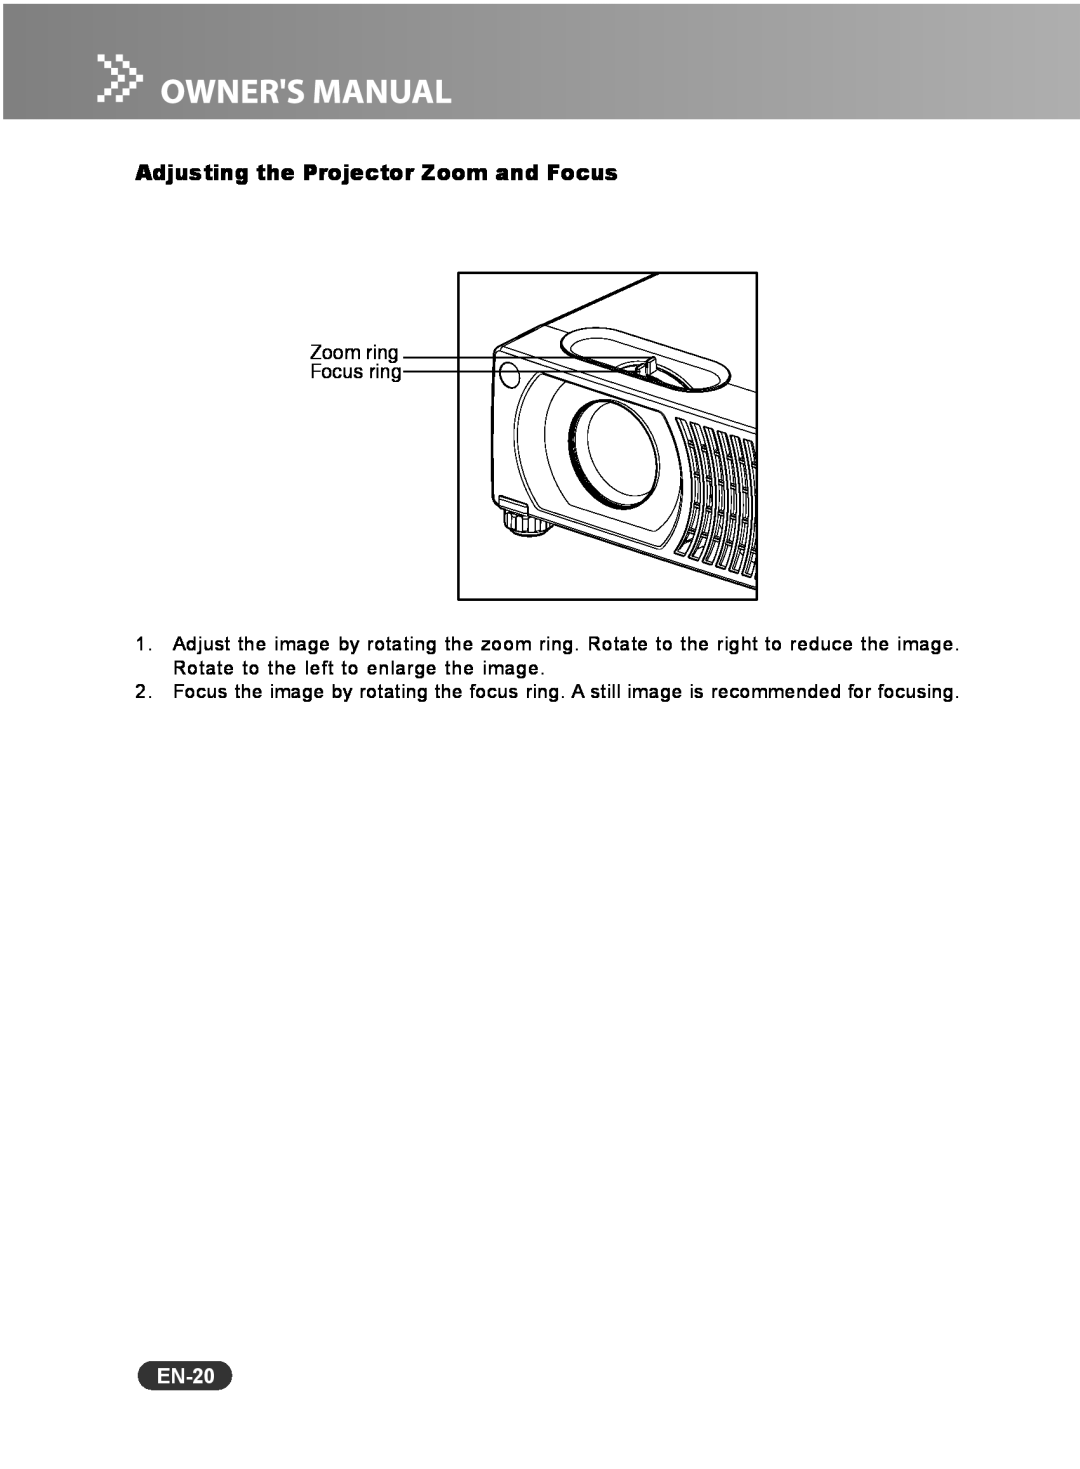 Sanyo PCL-WXU10N, PCL-WXU10E, PCL-WXU10B manual Adjusting the Projector Zoom and Focus, EN-20 